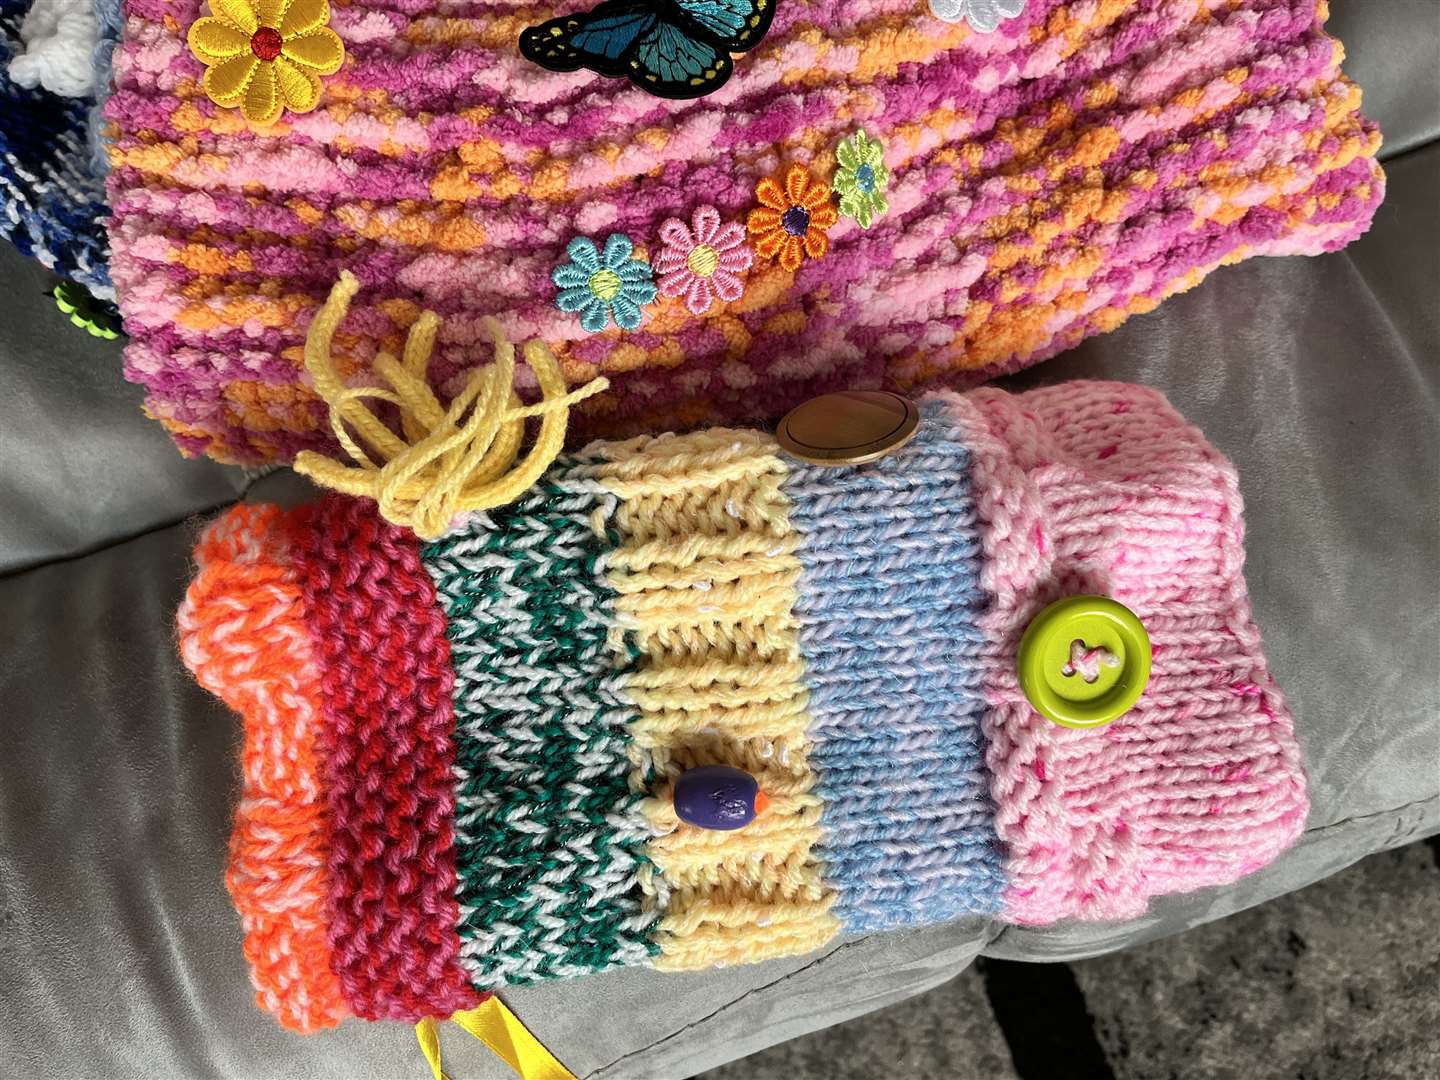 Home-made twiddle muffs are needed for dementia patients at Medway Maritime Hospital